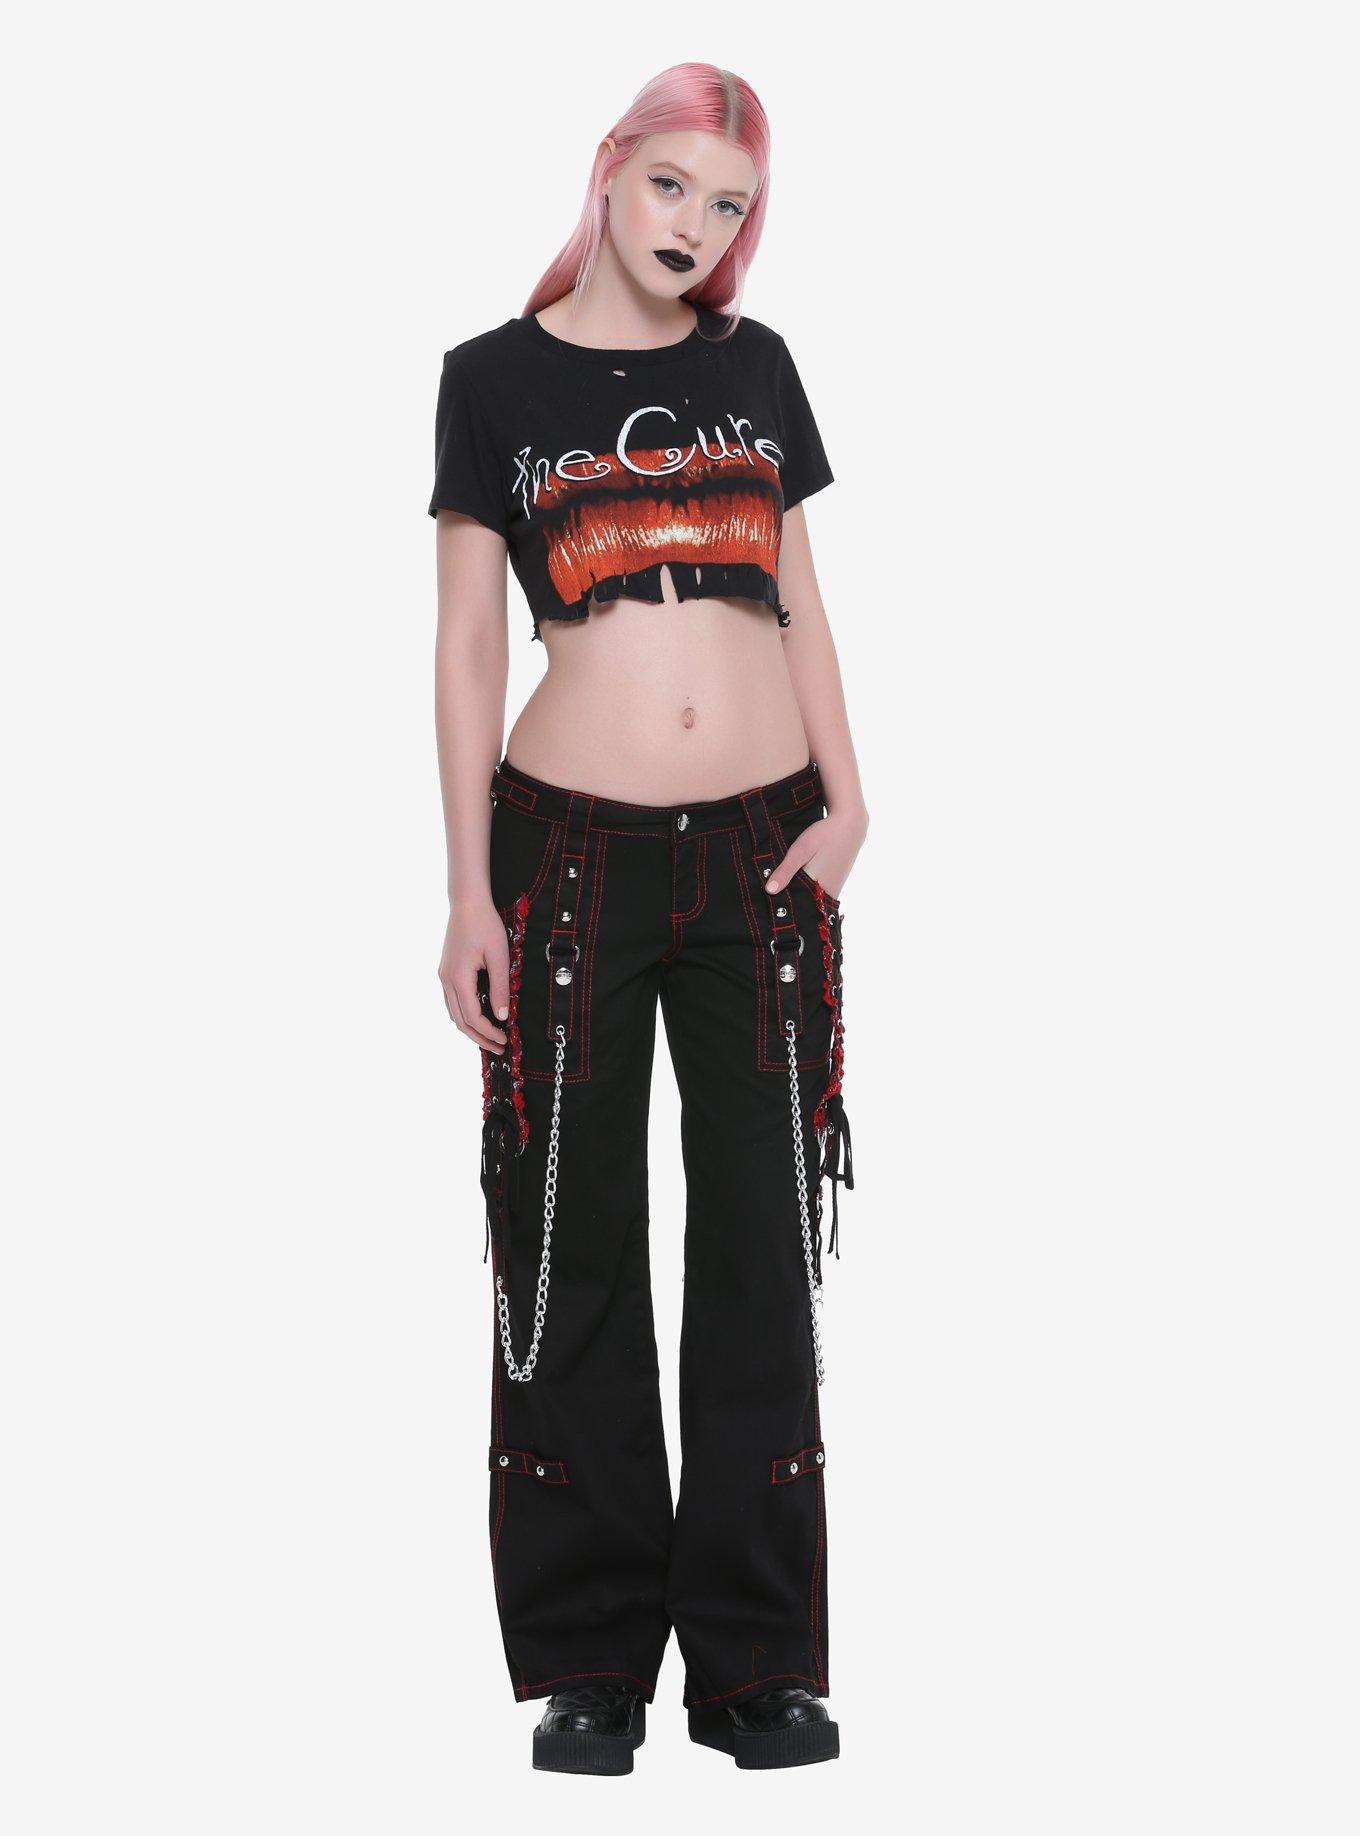 Forget Jncos. Hot-Topic Tripp chain pants were for the really cool kids :  r/Millennials